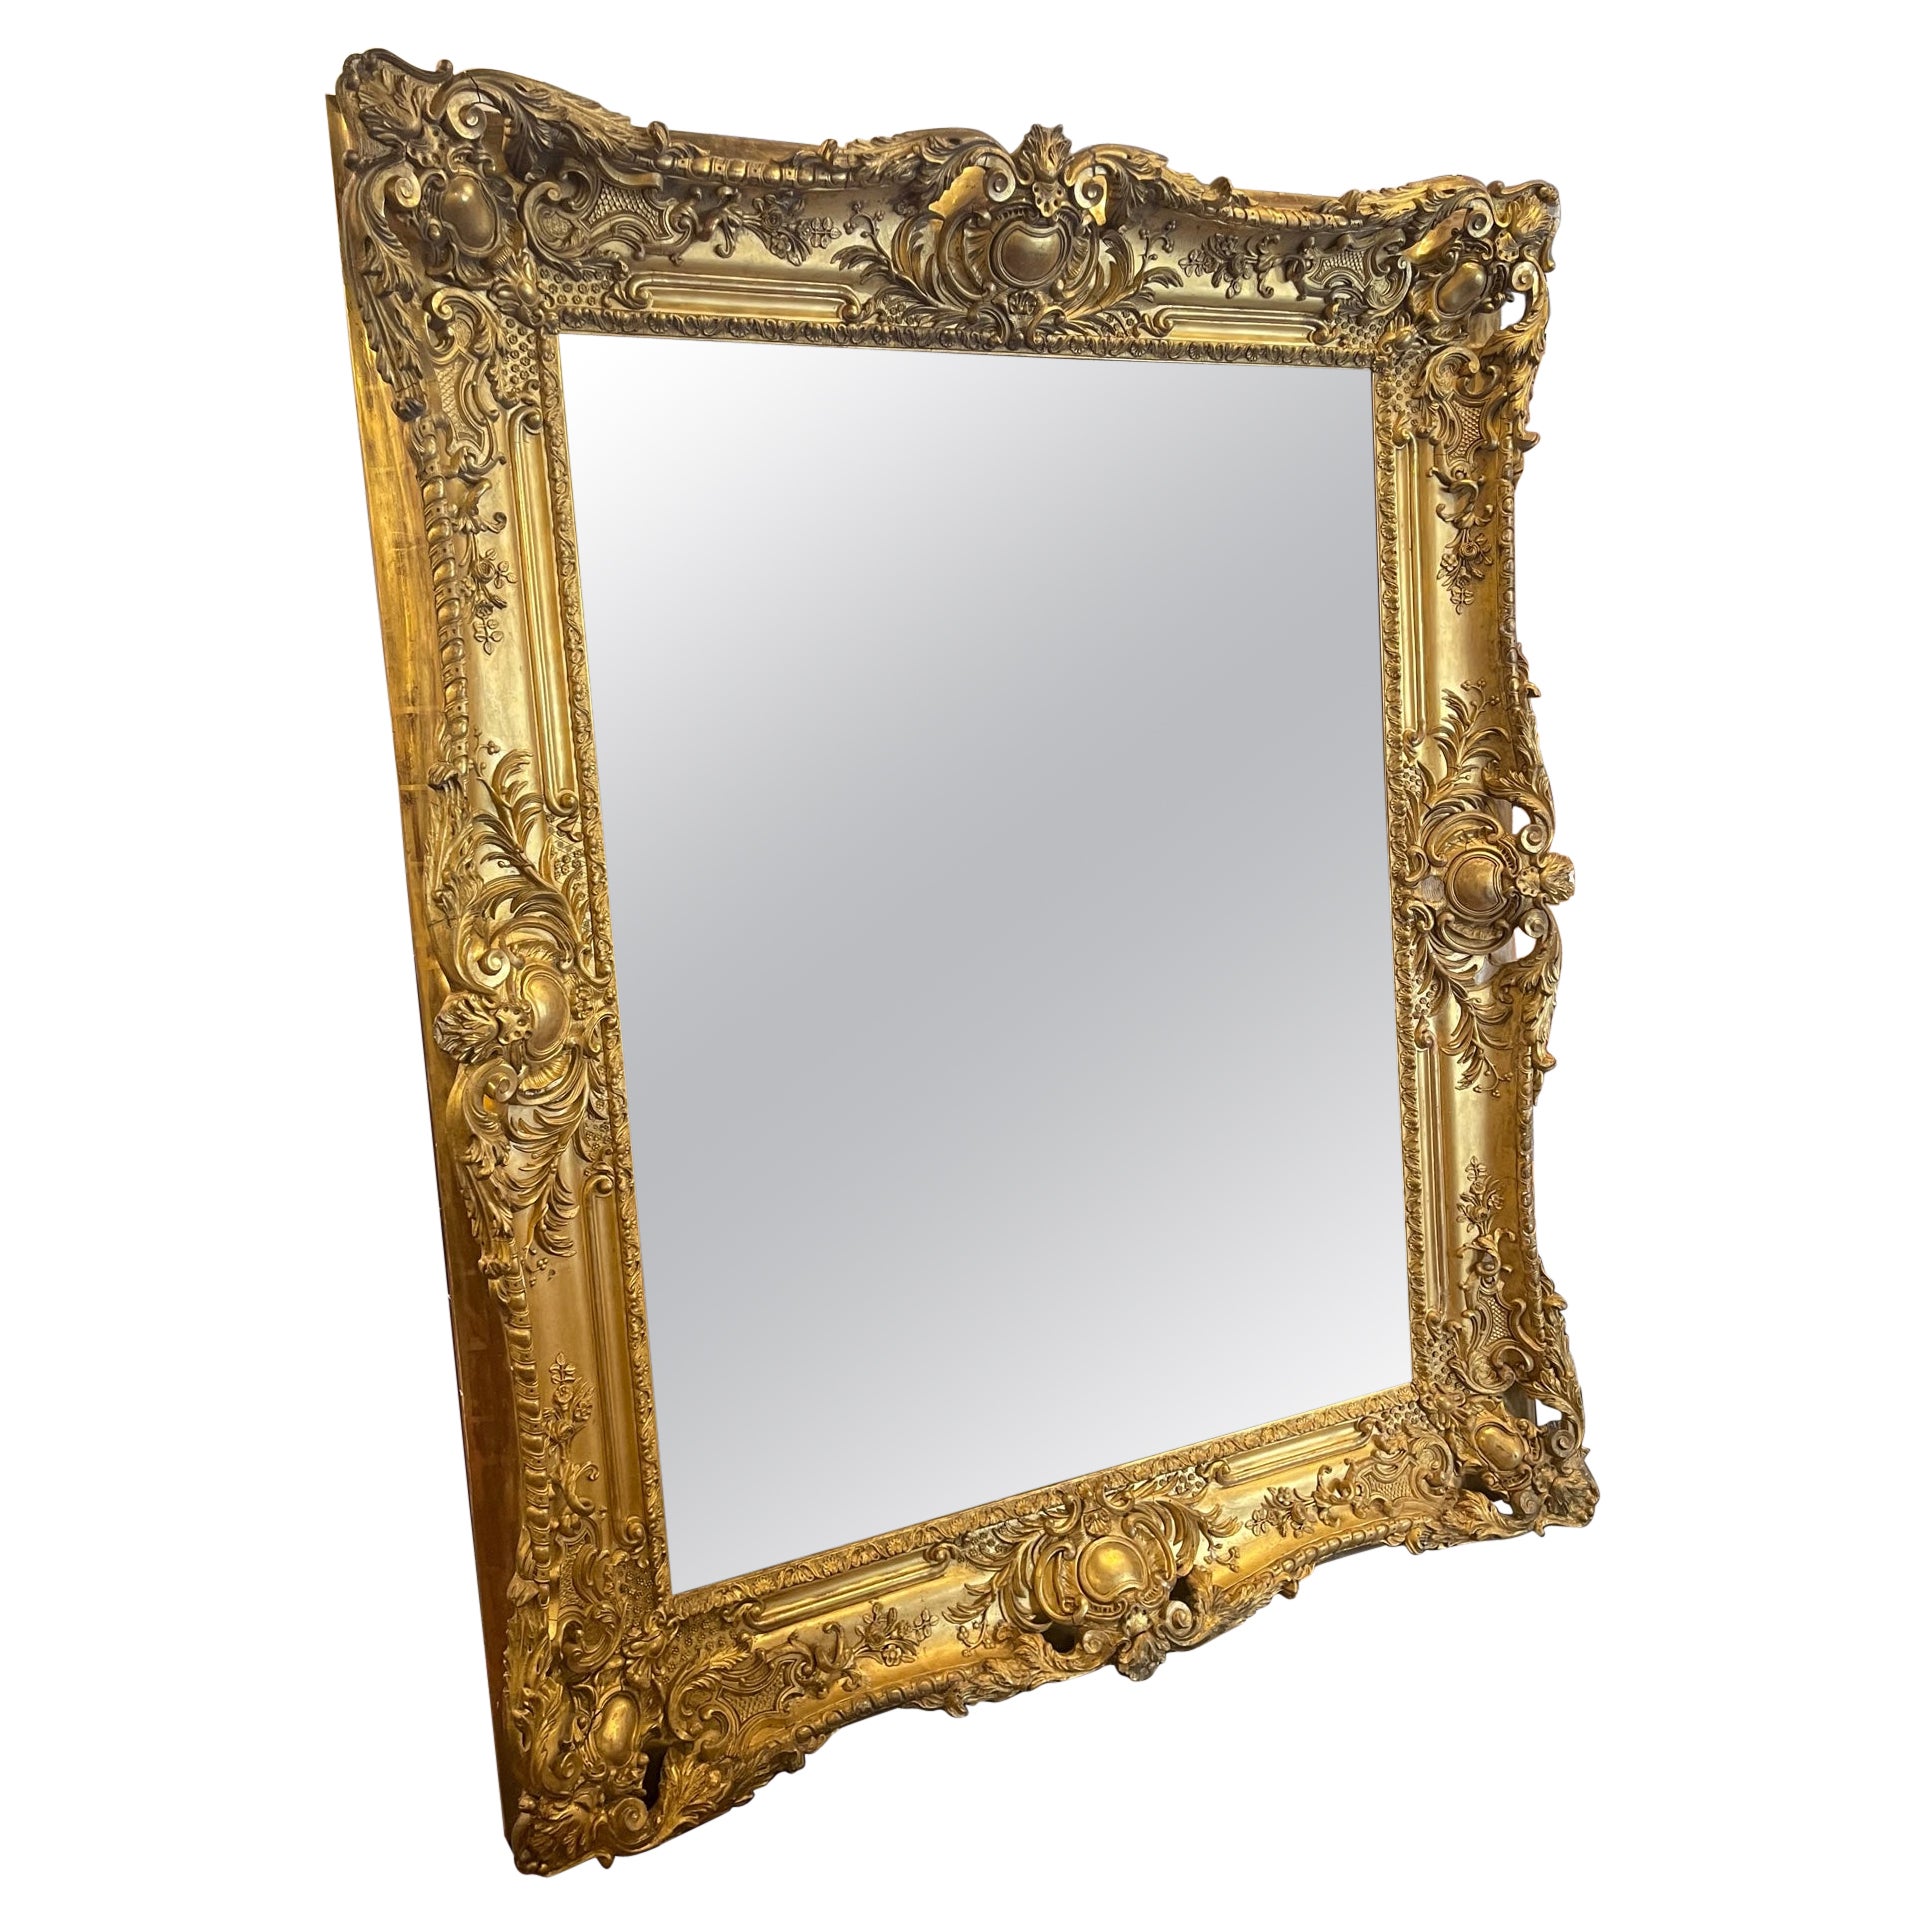 Louis XVI Style Giltwood Frame with Decorative Carved Design, Early 20th Century